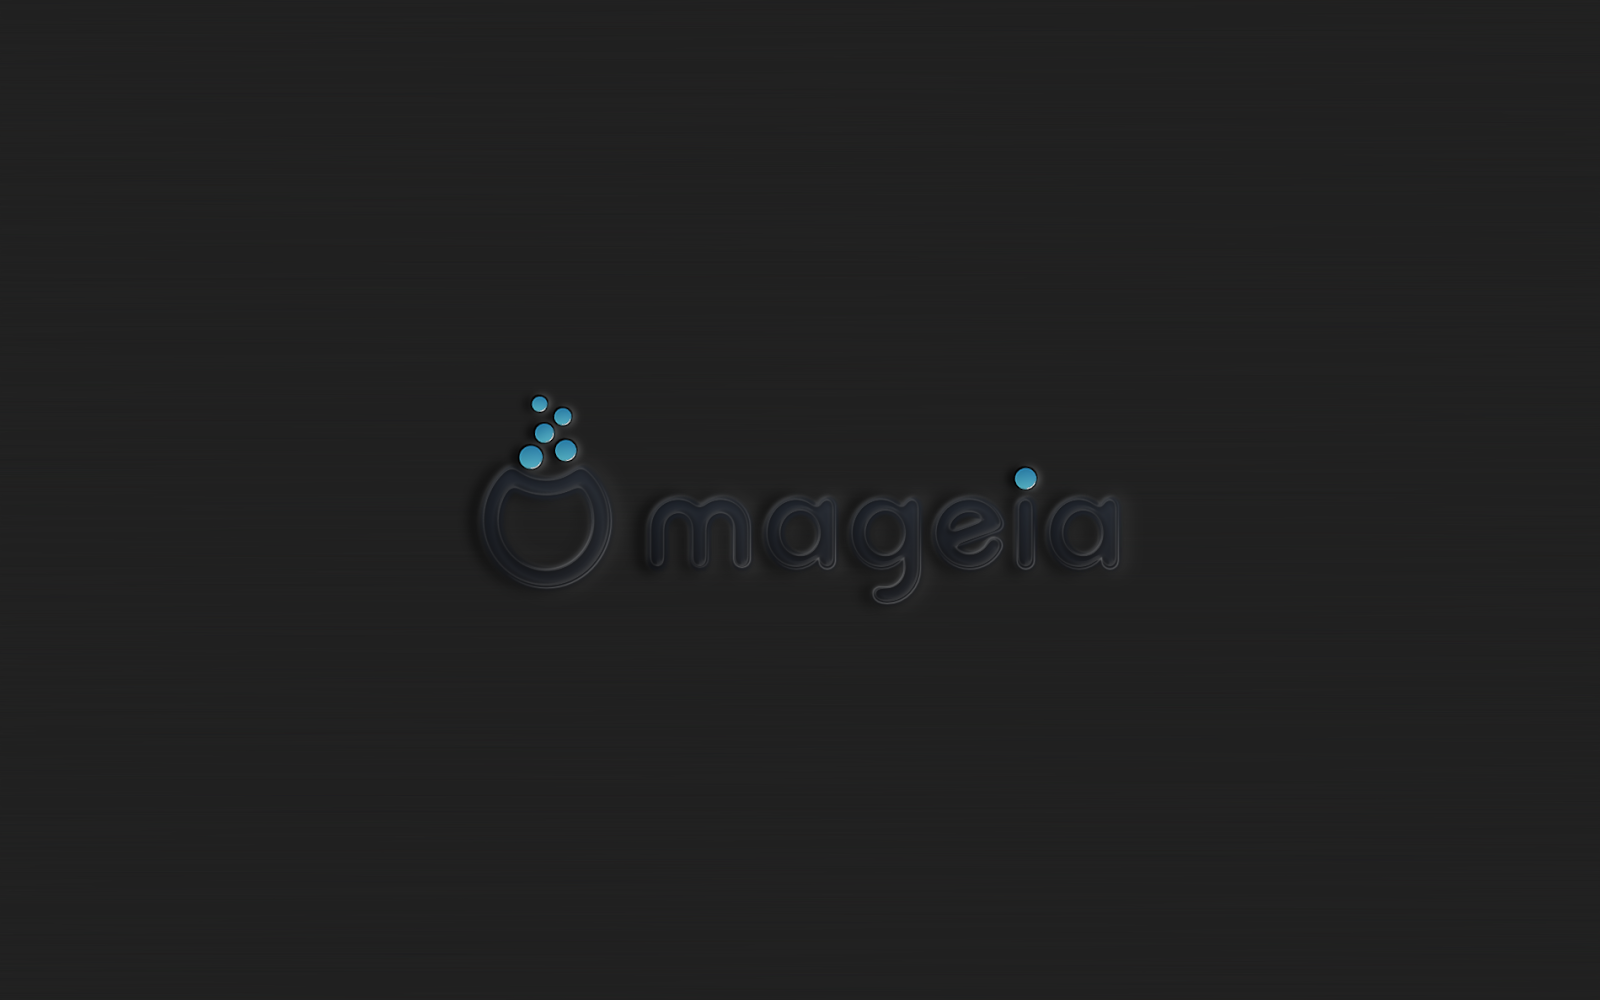 Free Linux Wallpaper Mageia Linux Wallpaper